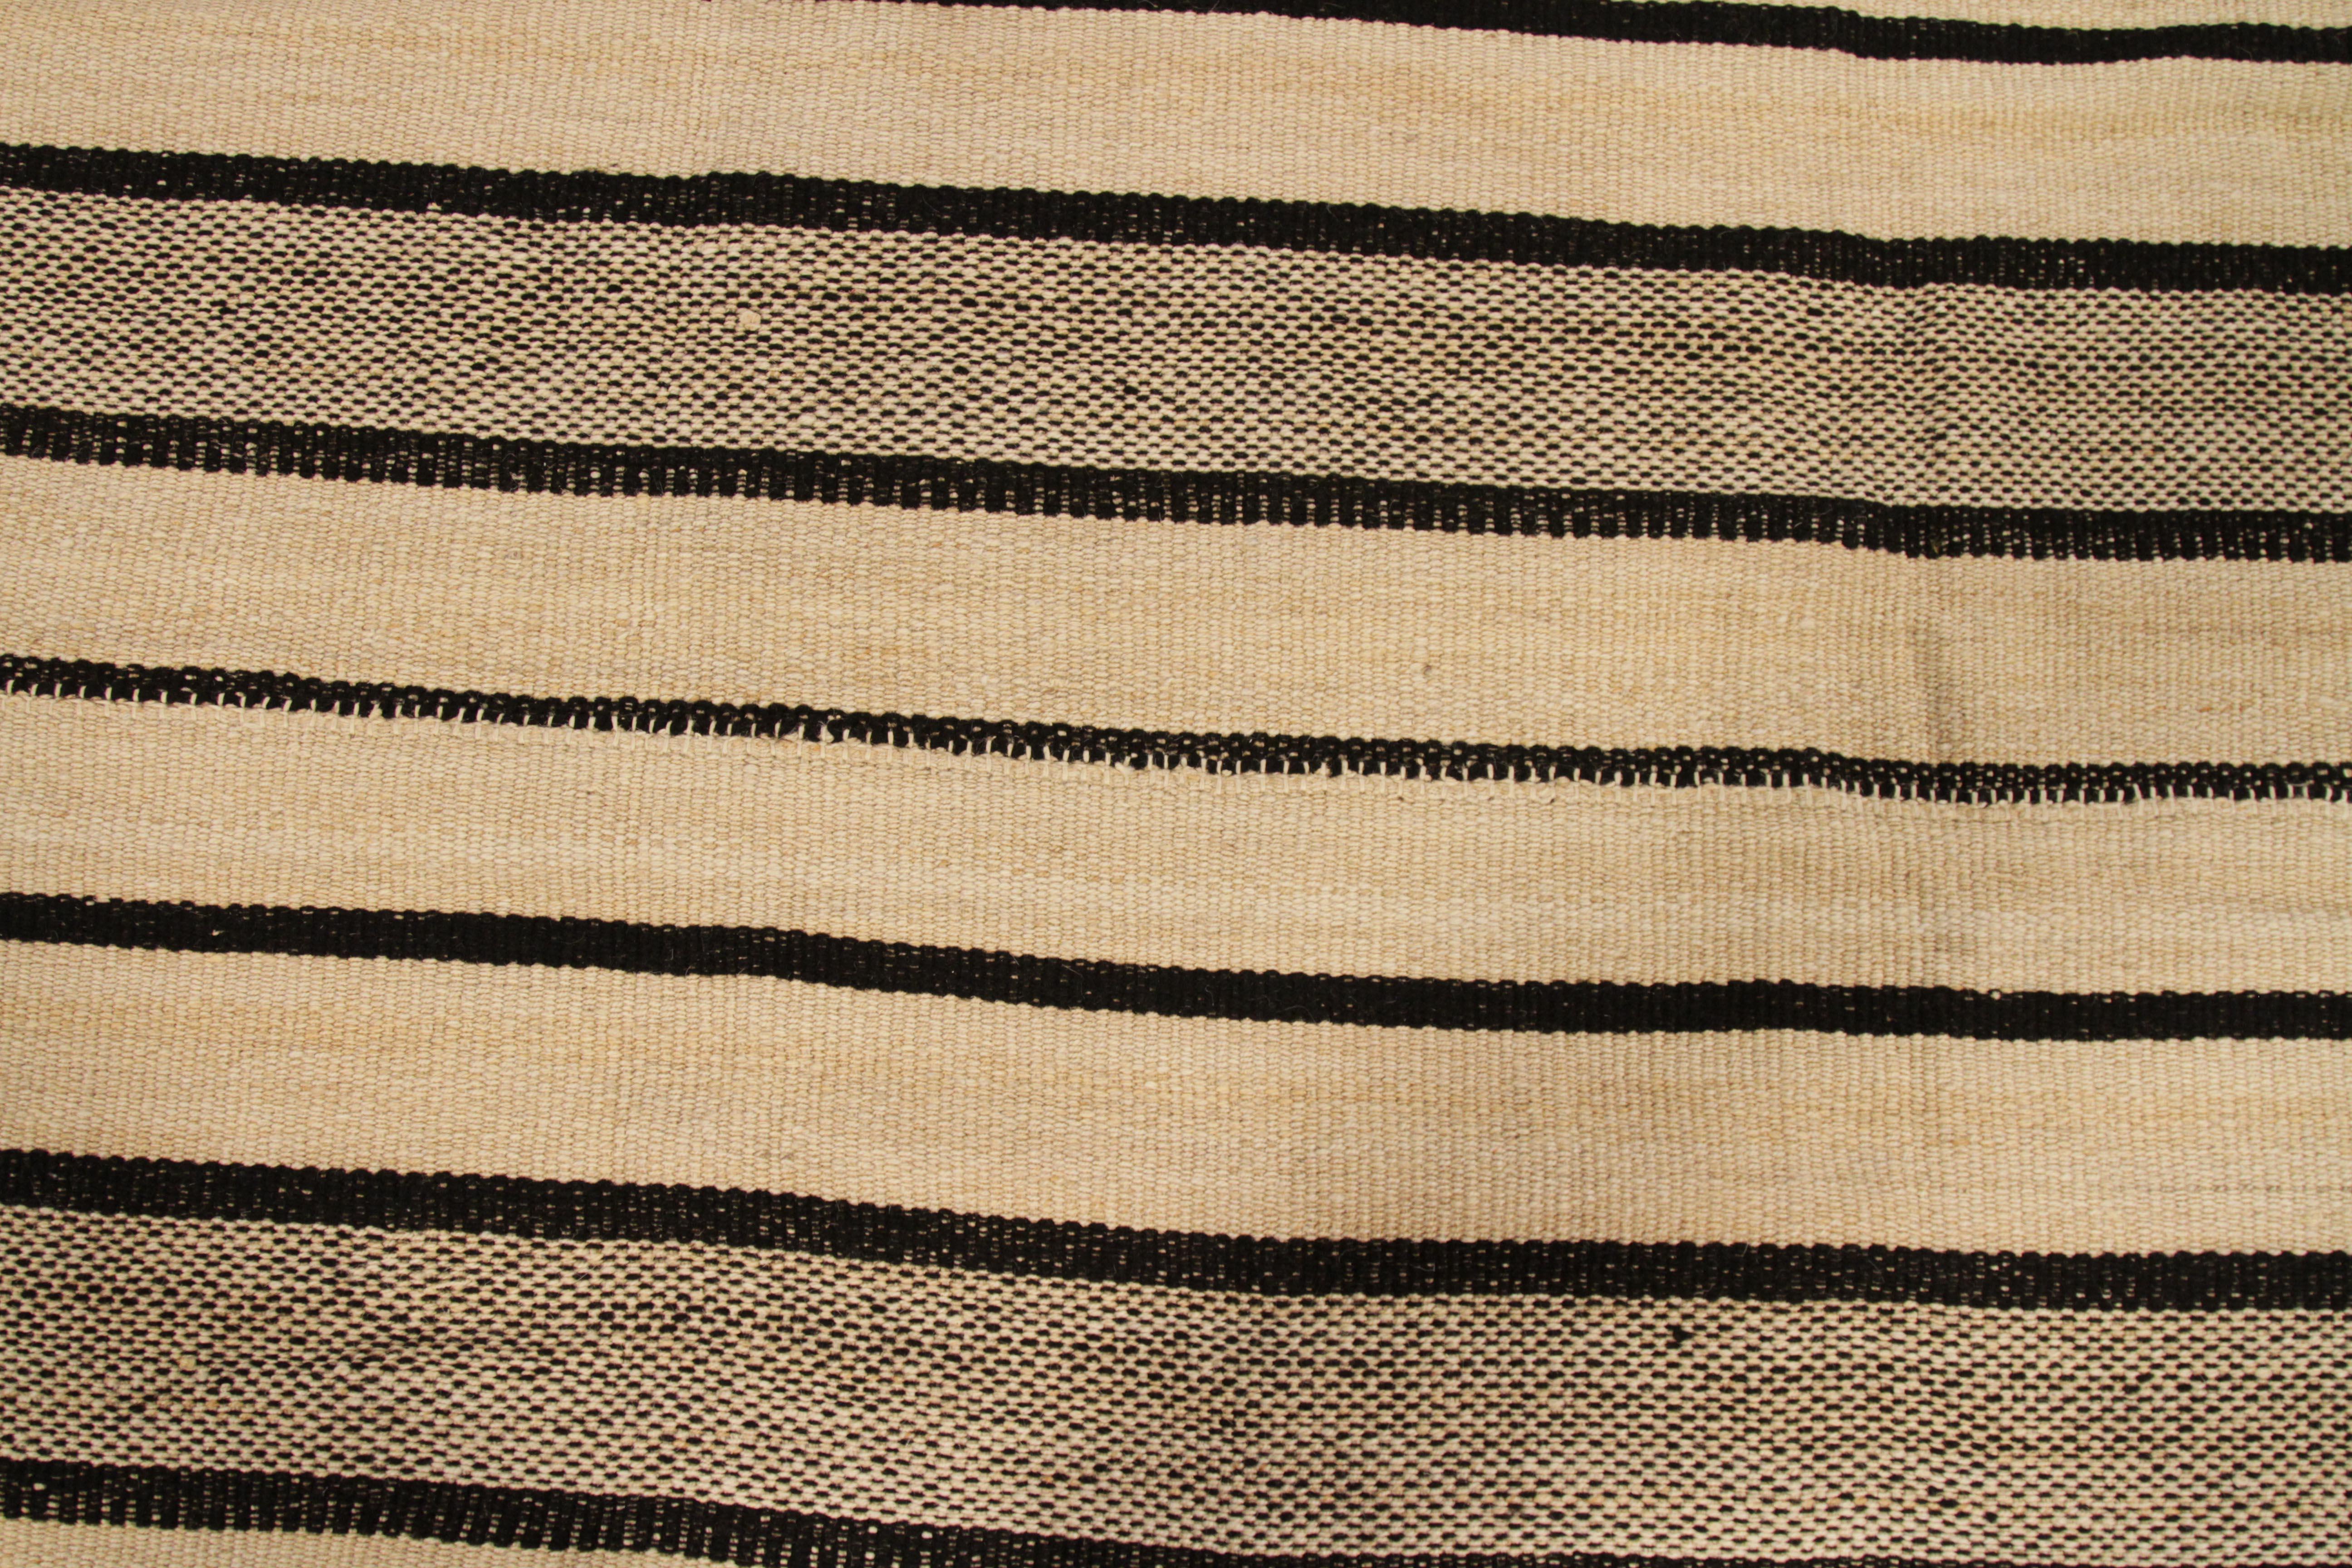 New Kilim Persian Rug with Thick and Thin Stripes in Black and Beige In New Condition For Sale In Dallas, TX